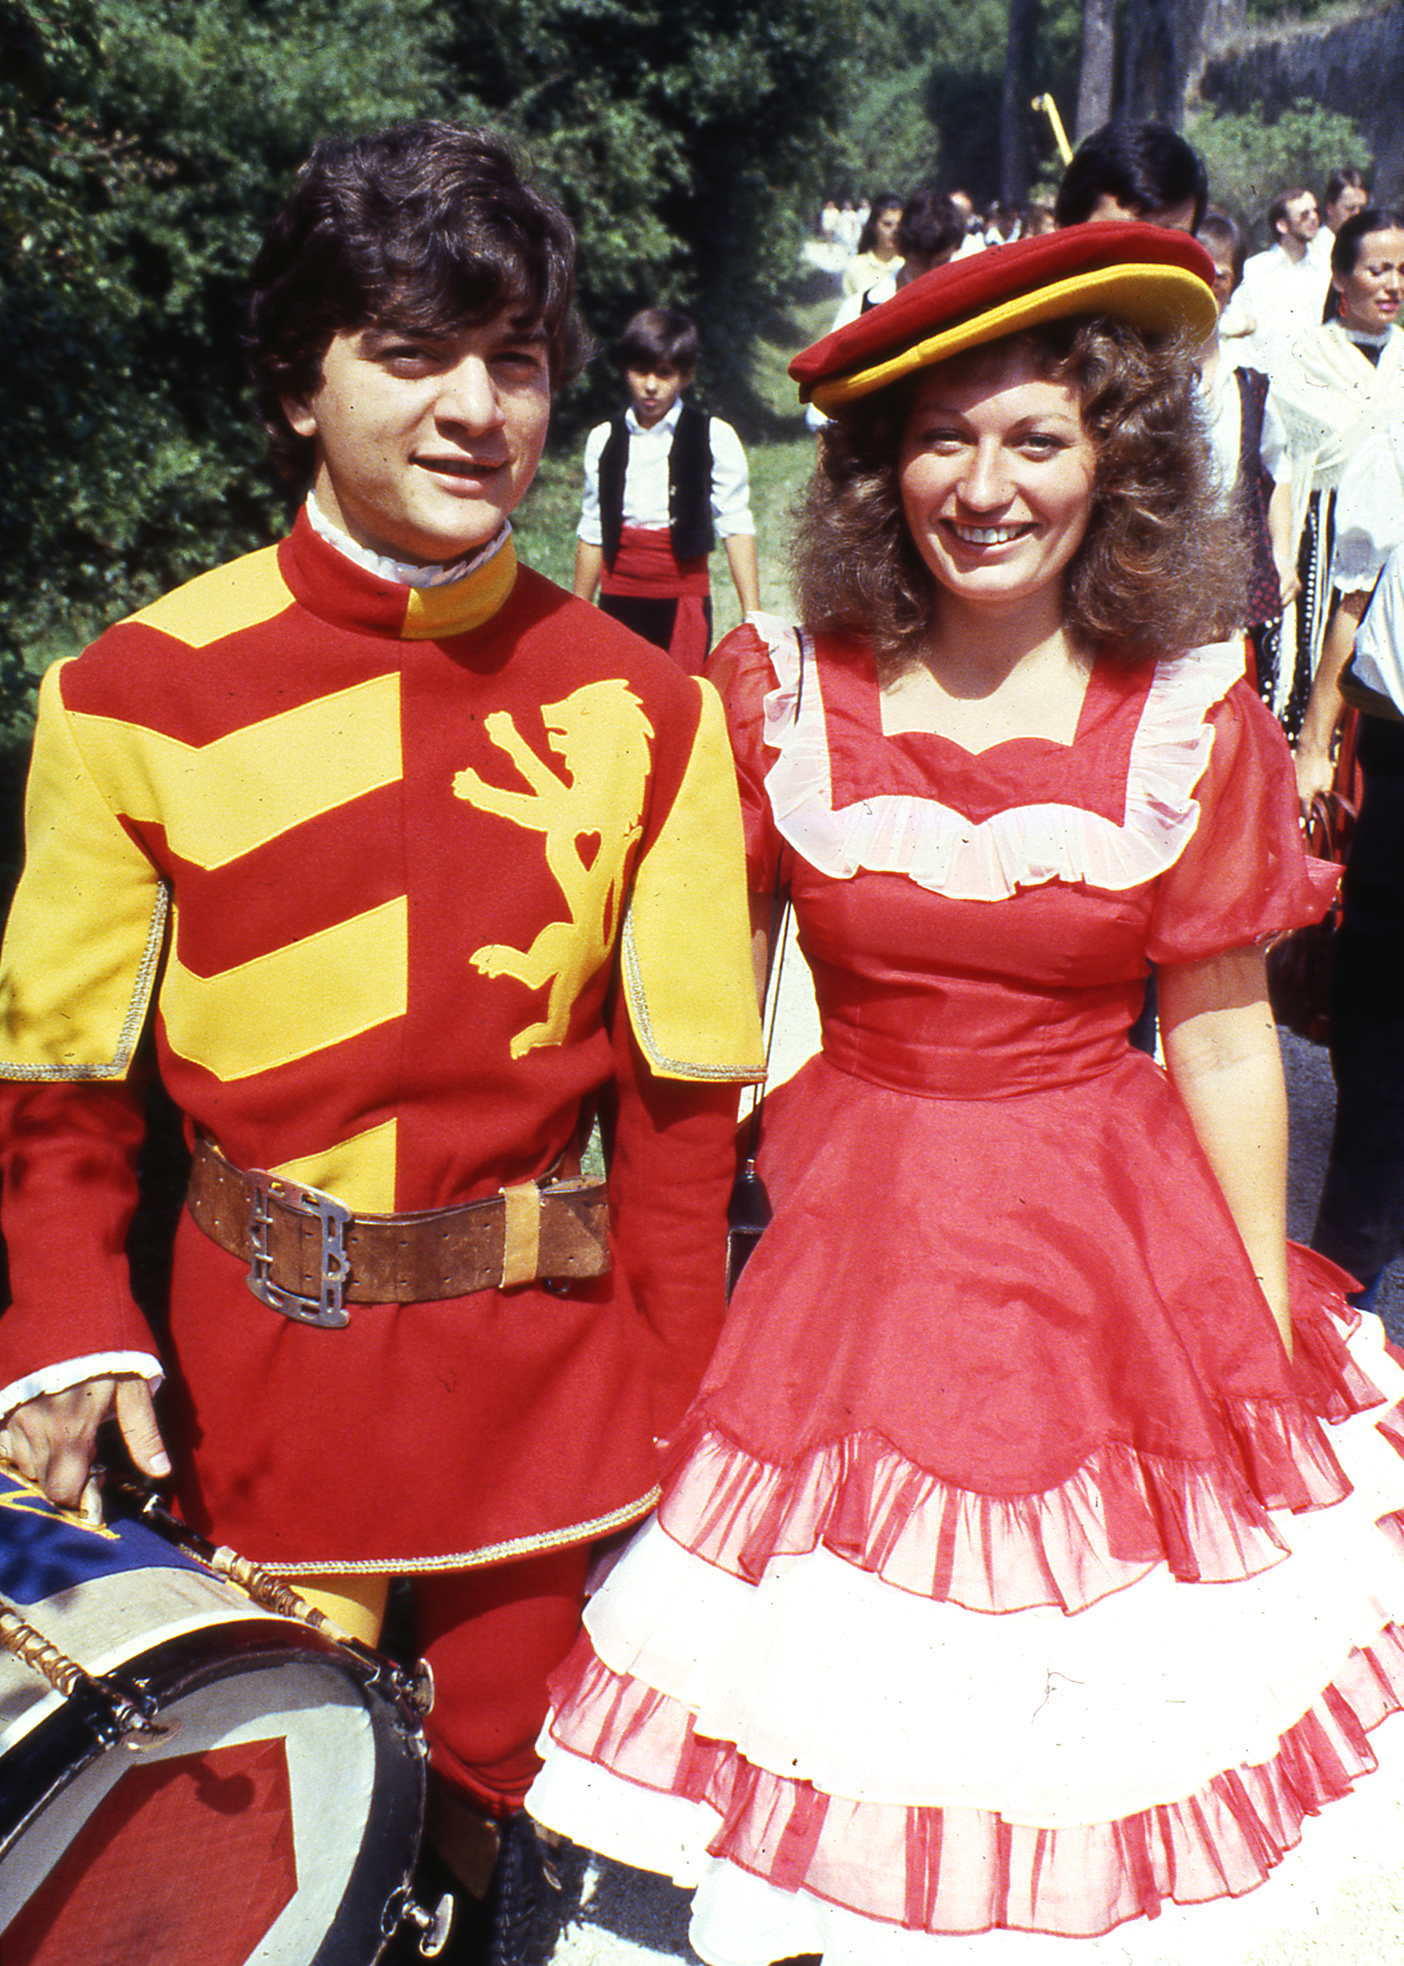 A BYU folk dancer, dressed in a red costume poses with an Italian drummer dressed in a red and yellow costume.